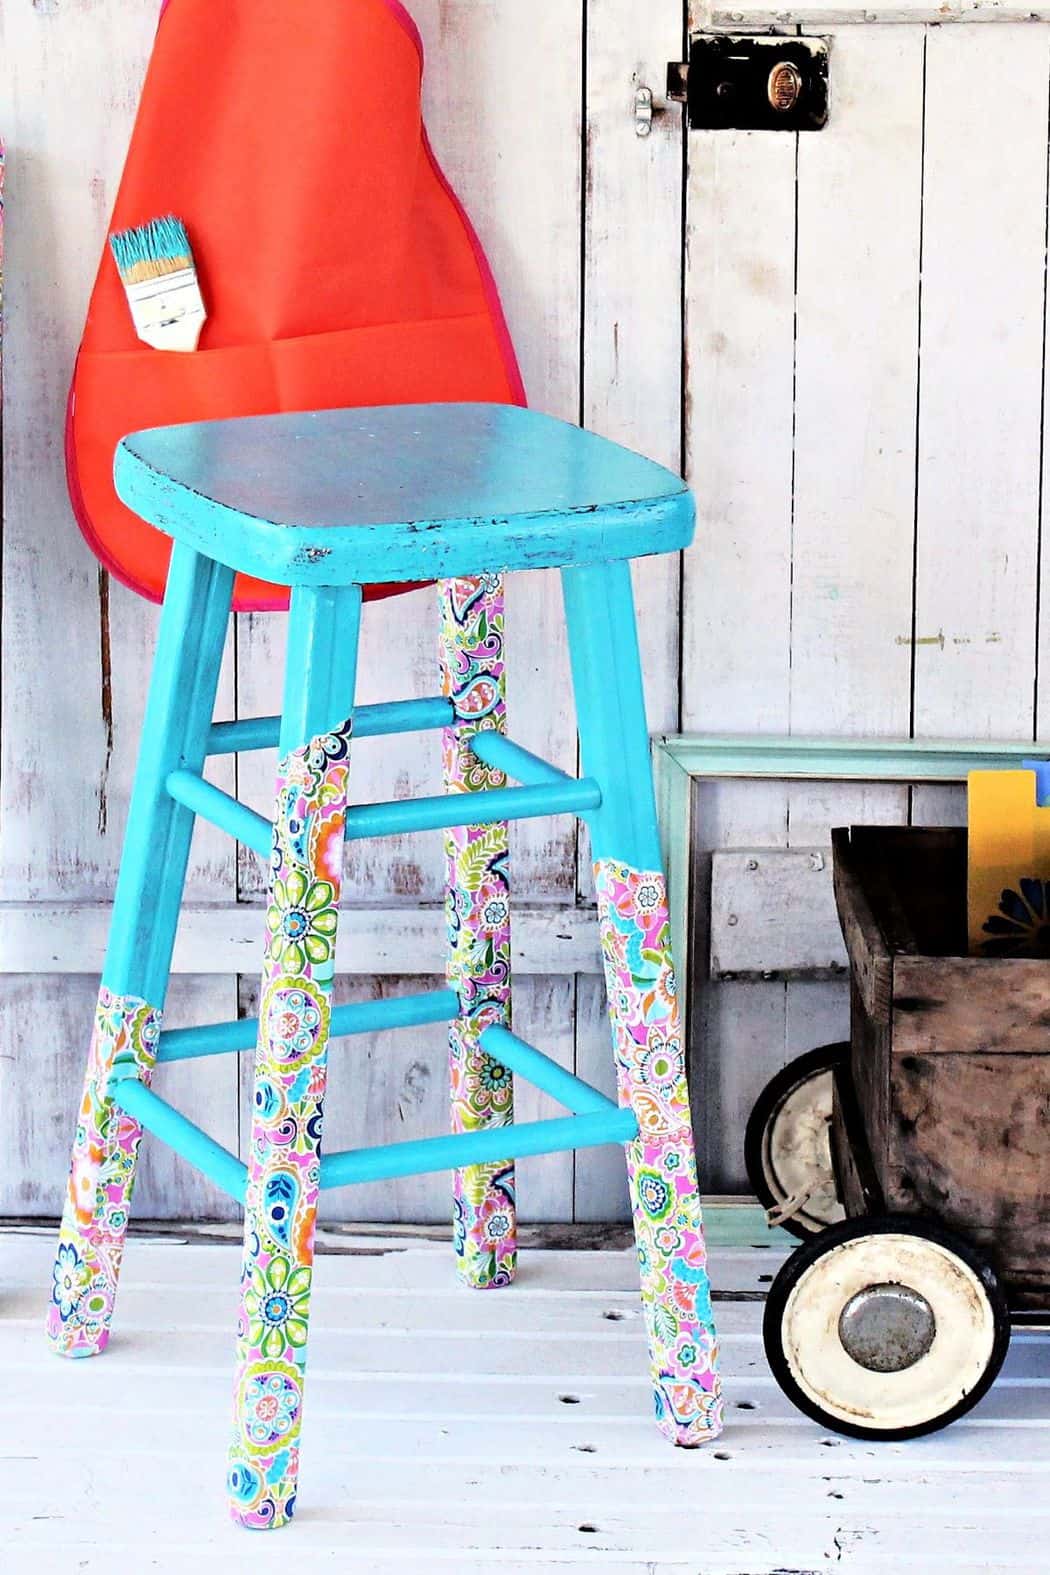 The Best Decoupage Paper & How to Apply it to Painted Furniture